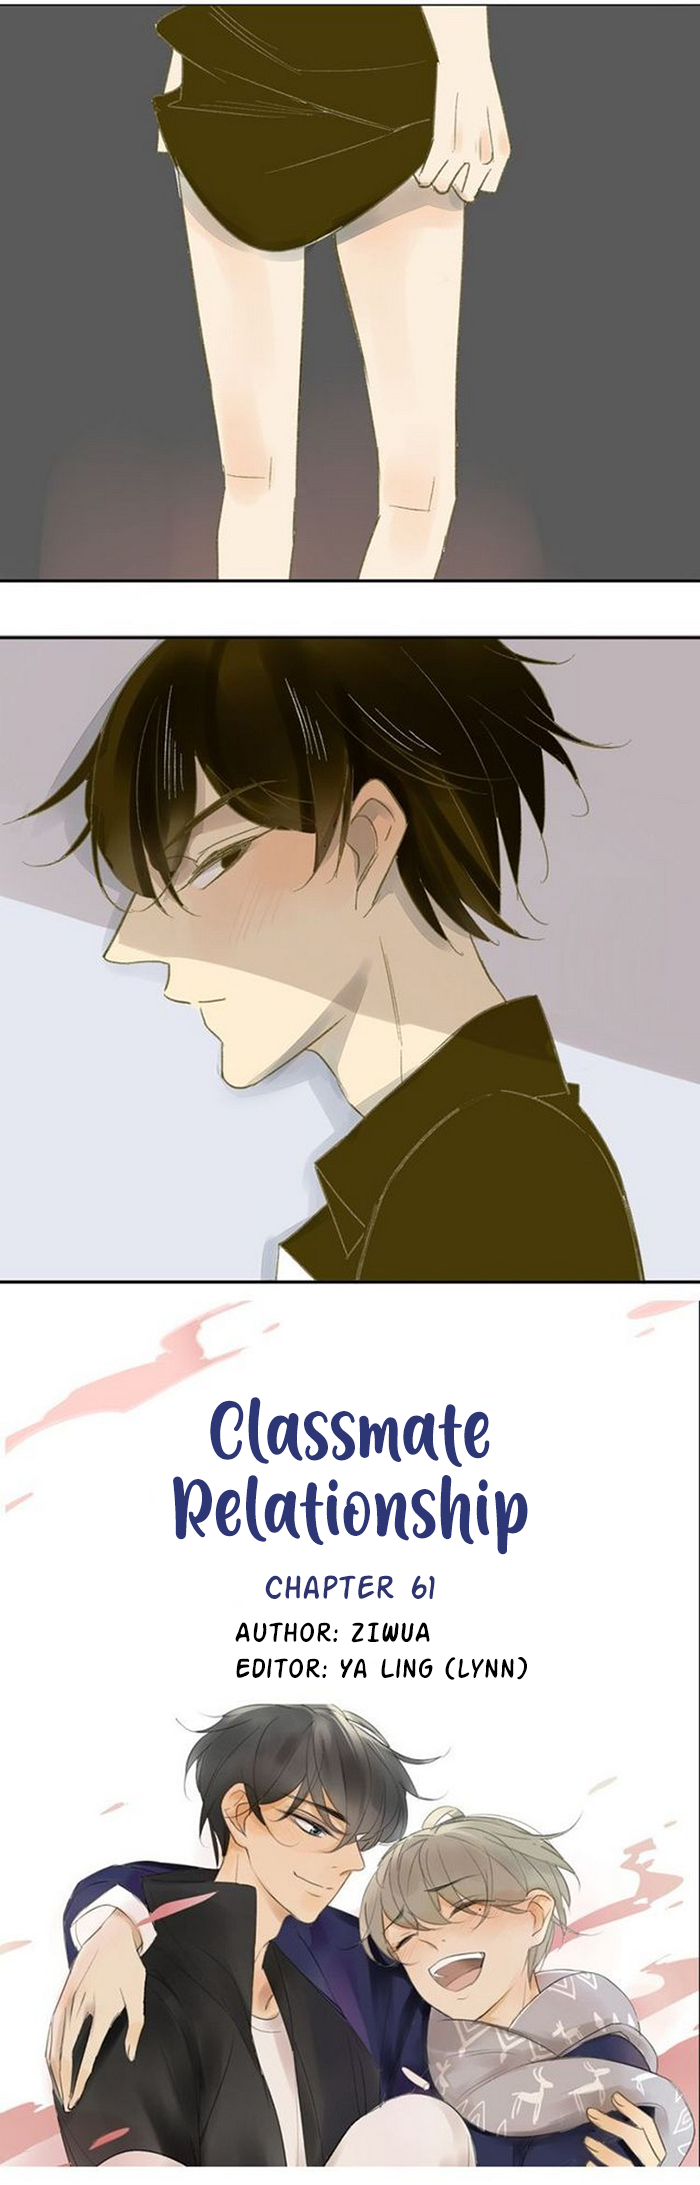 Classmate Relationship? - Page 3